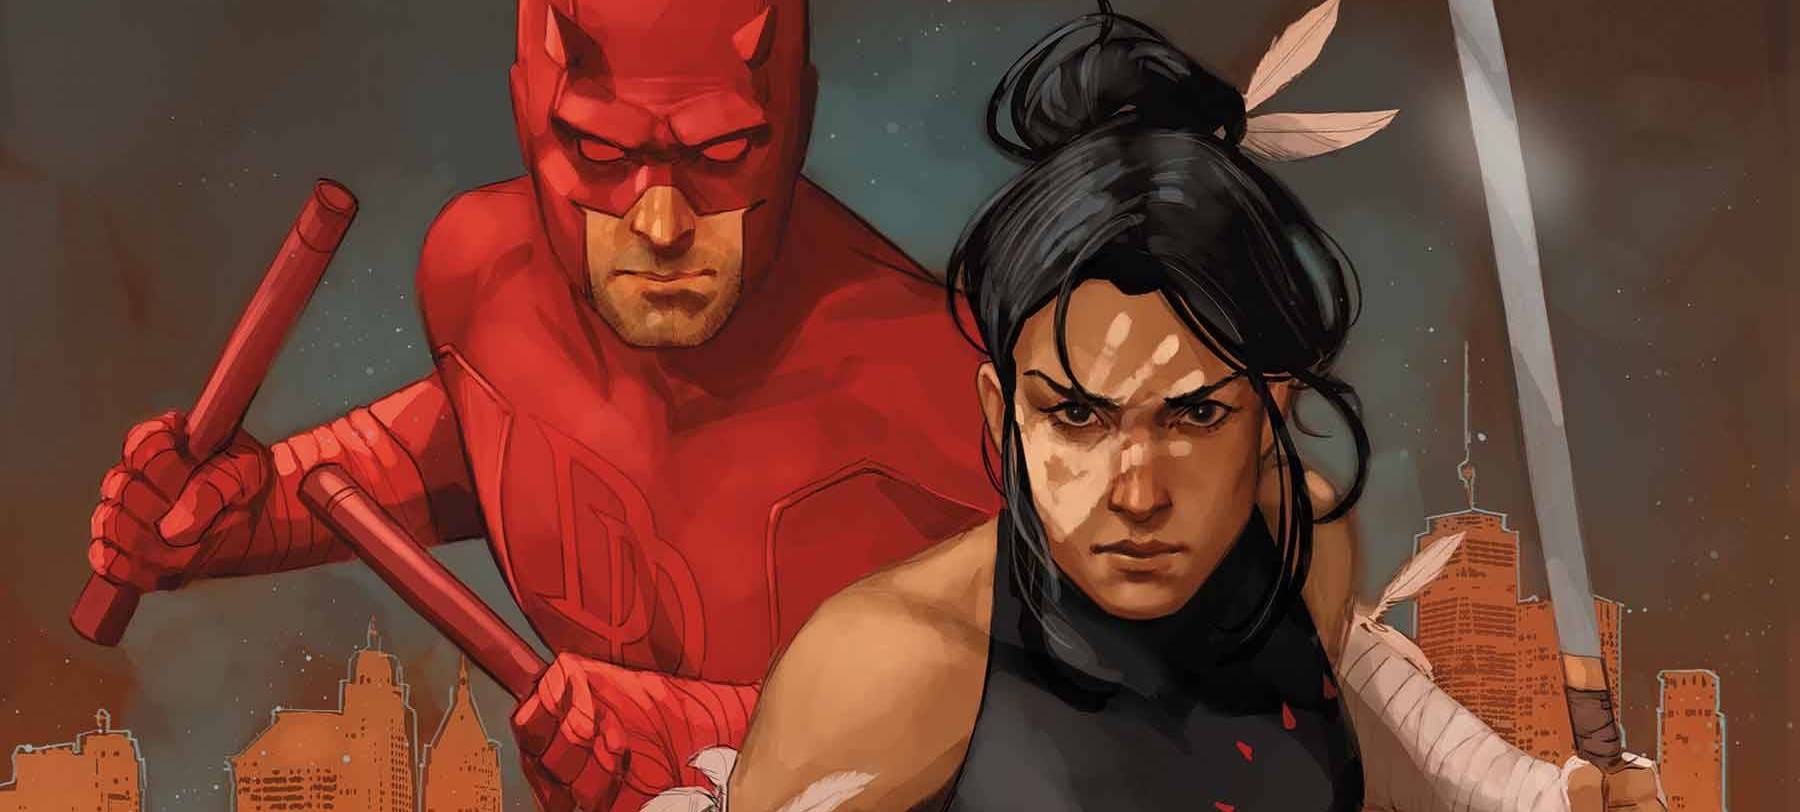 'Daredevil & Echo' #1 sets up interesting mysteries of the past and present